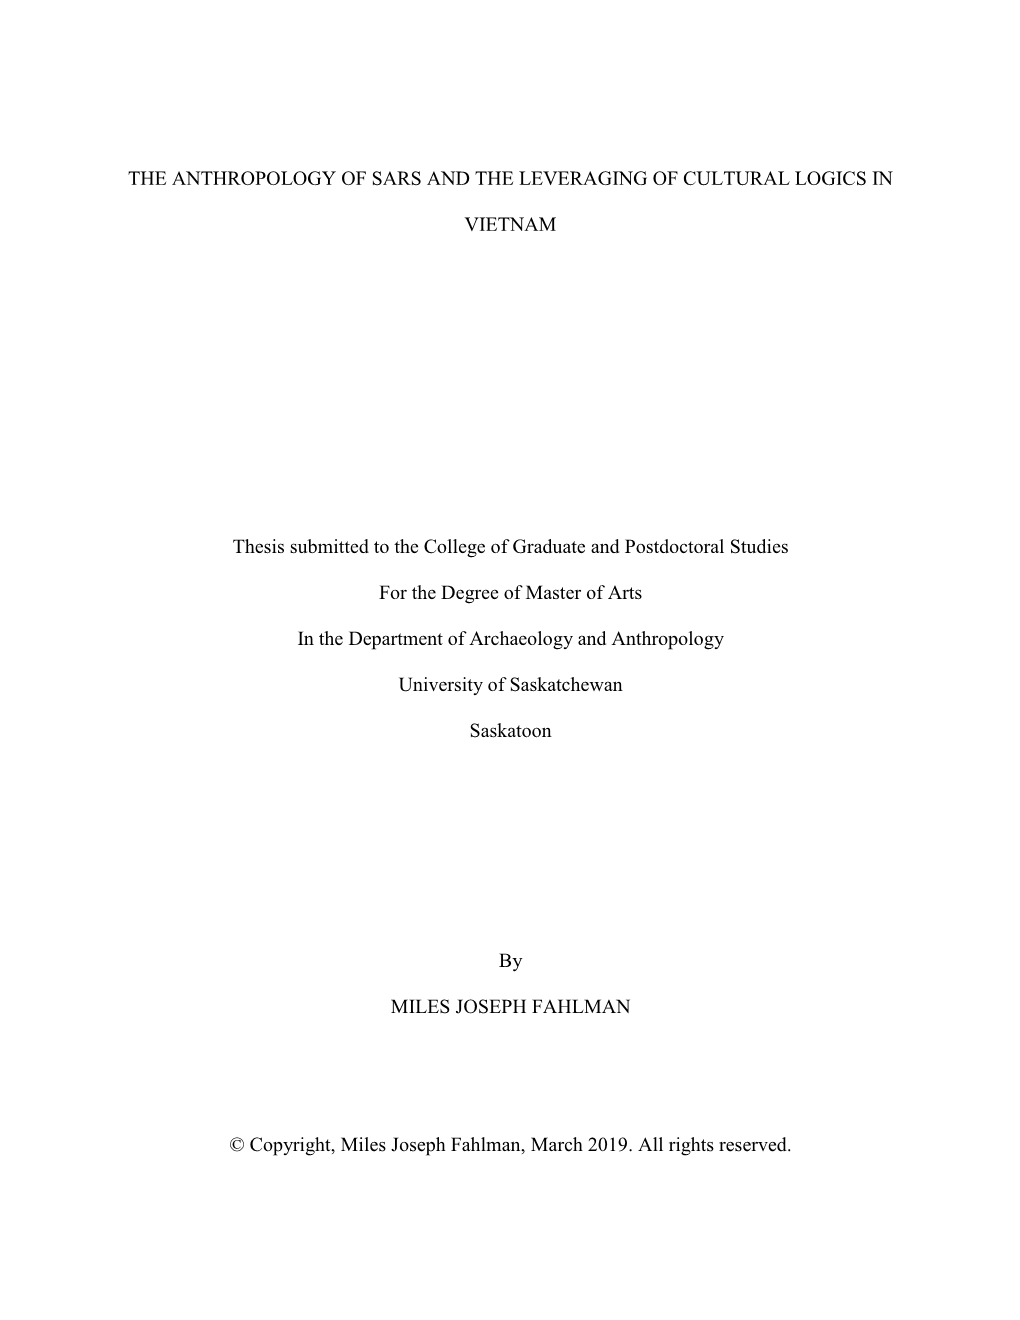 THE ANTHROPOLOGY of SARS and the LEVERAGING of CULTURAL LOGICS in VIETNAM Thesis Submitted to the College of Graduate and Postdo